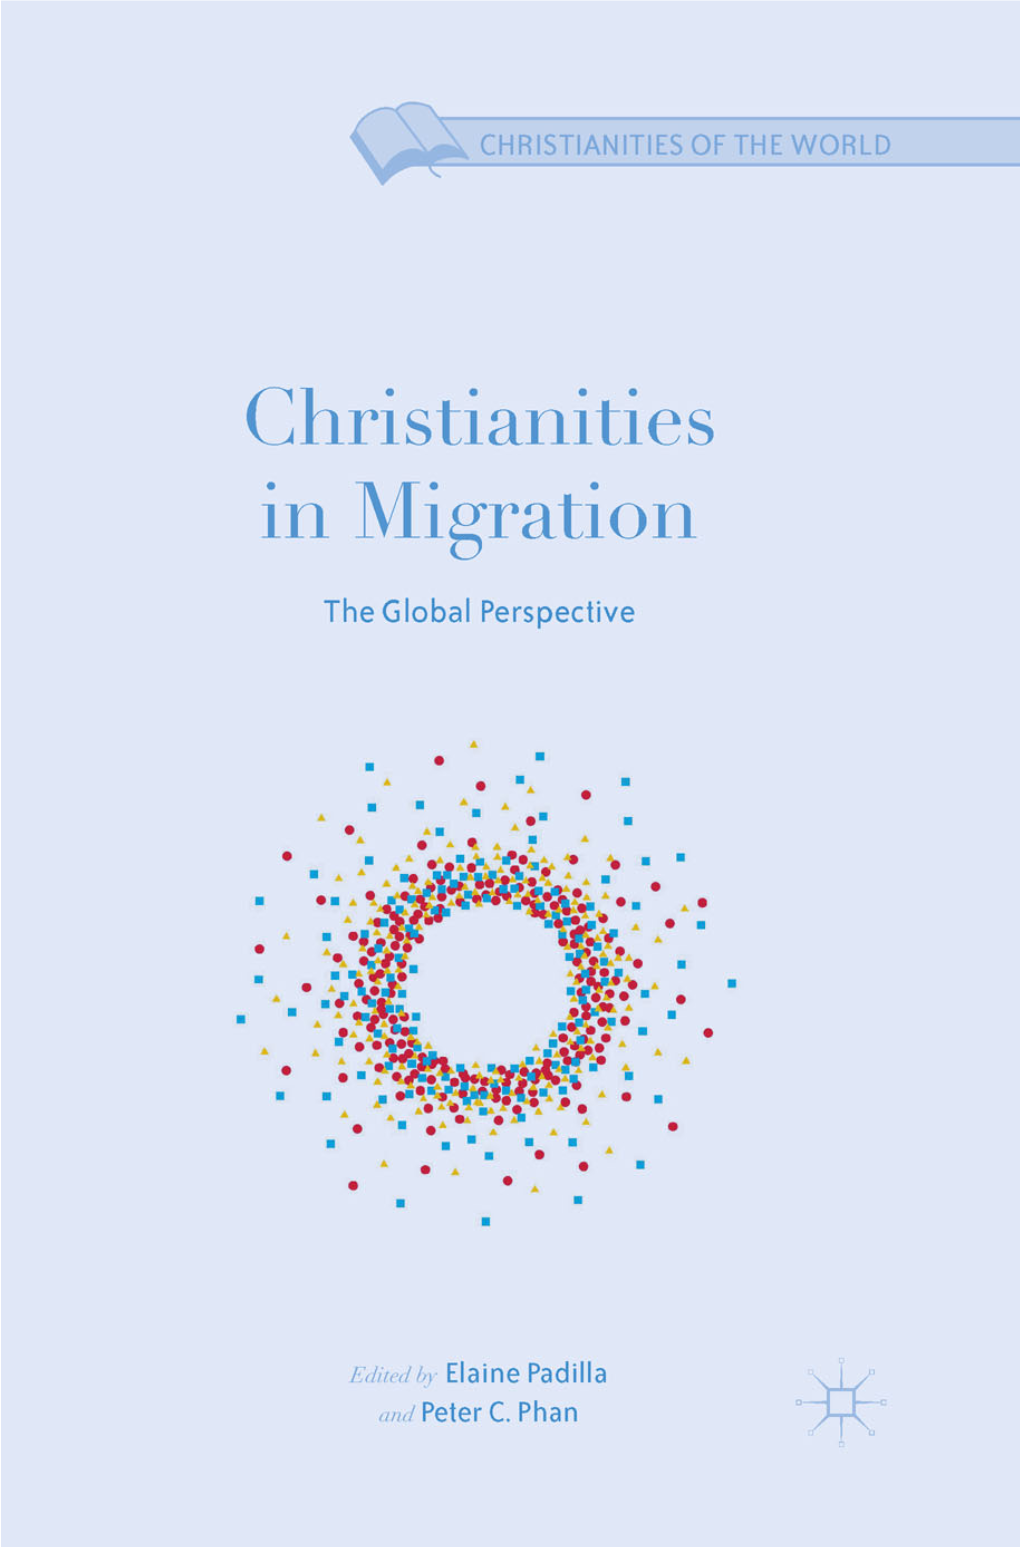 Christianity As an Institutional Migrant: Historical, Theological, and Ethical Perspectives 9 Peter C